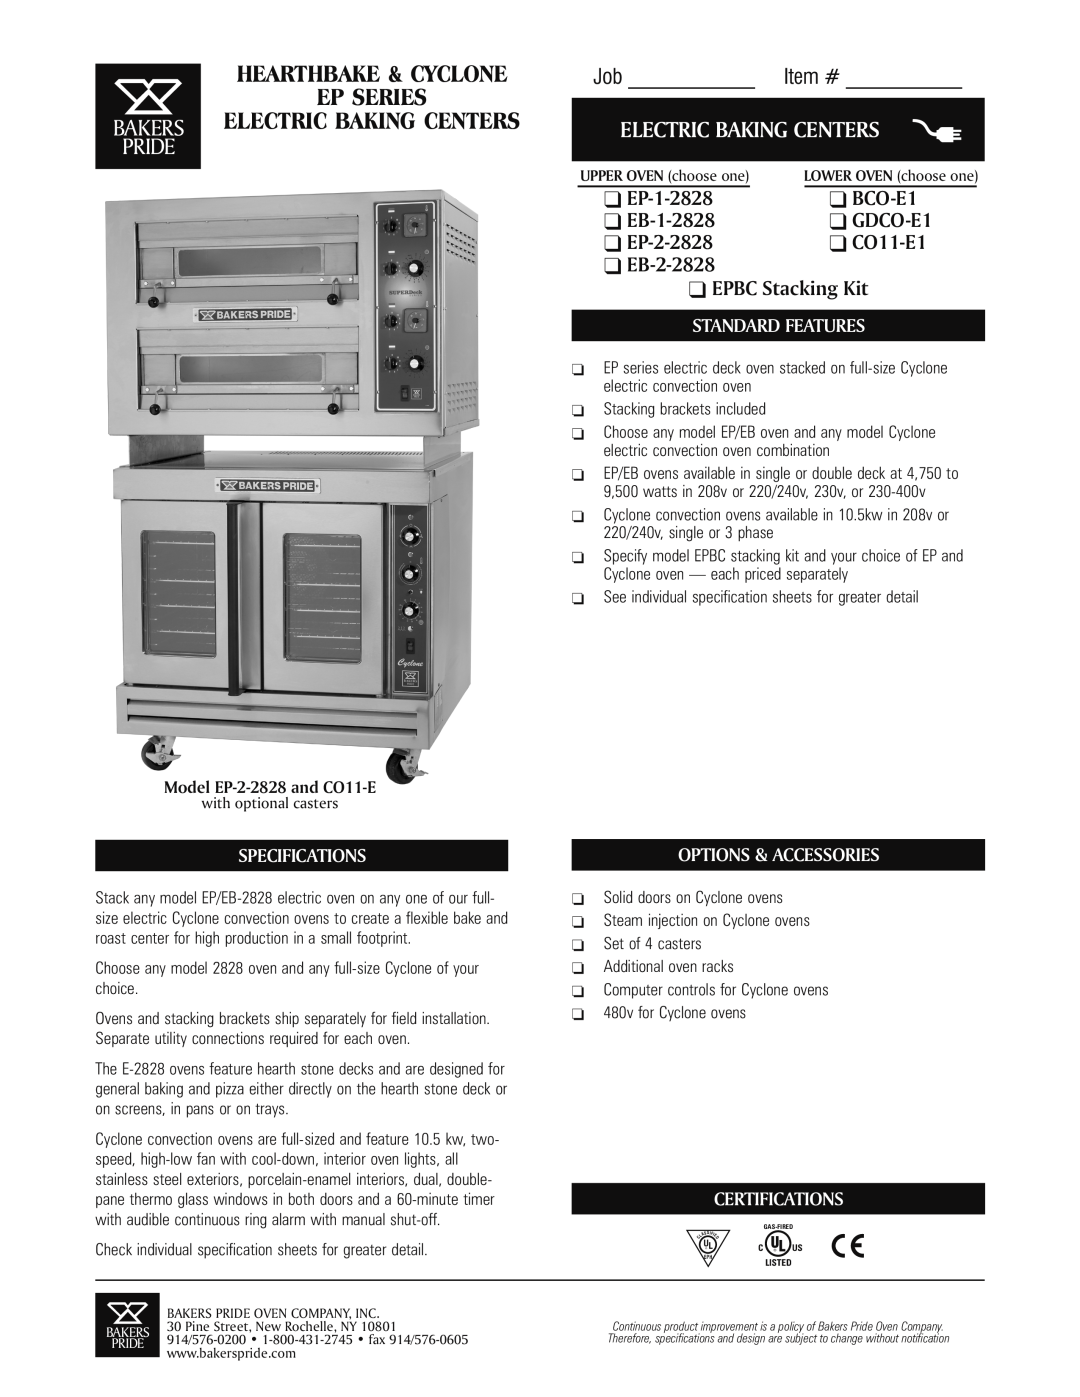 Bakers Pride Oven EP-1-2828 specifications Model EP-2-2828and CO11-E, Hearthbake & Cyclone Ep Series, Job Item #, BCO-E1 